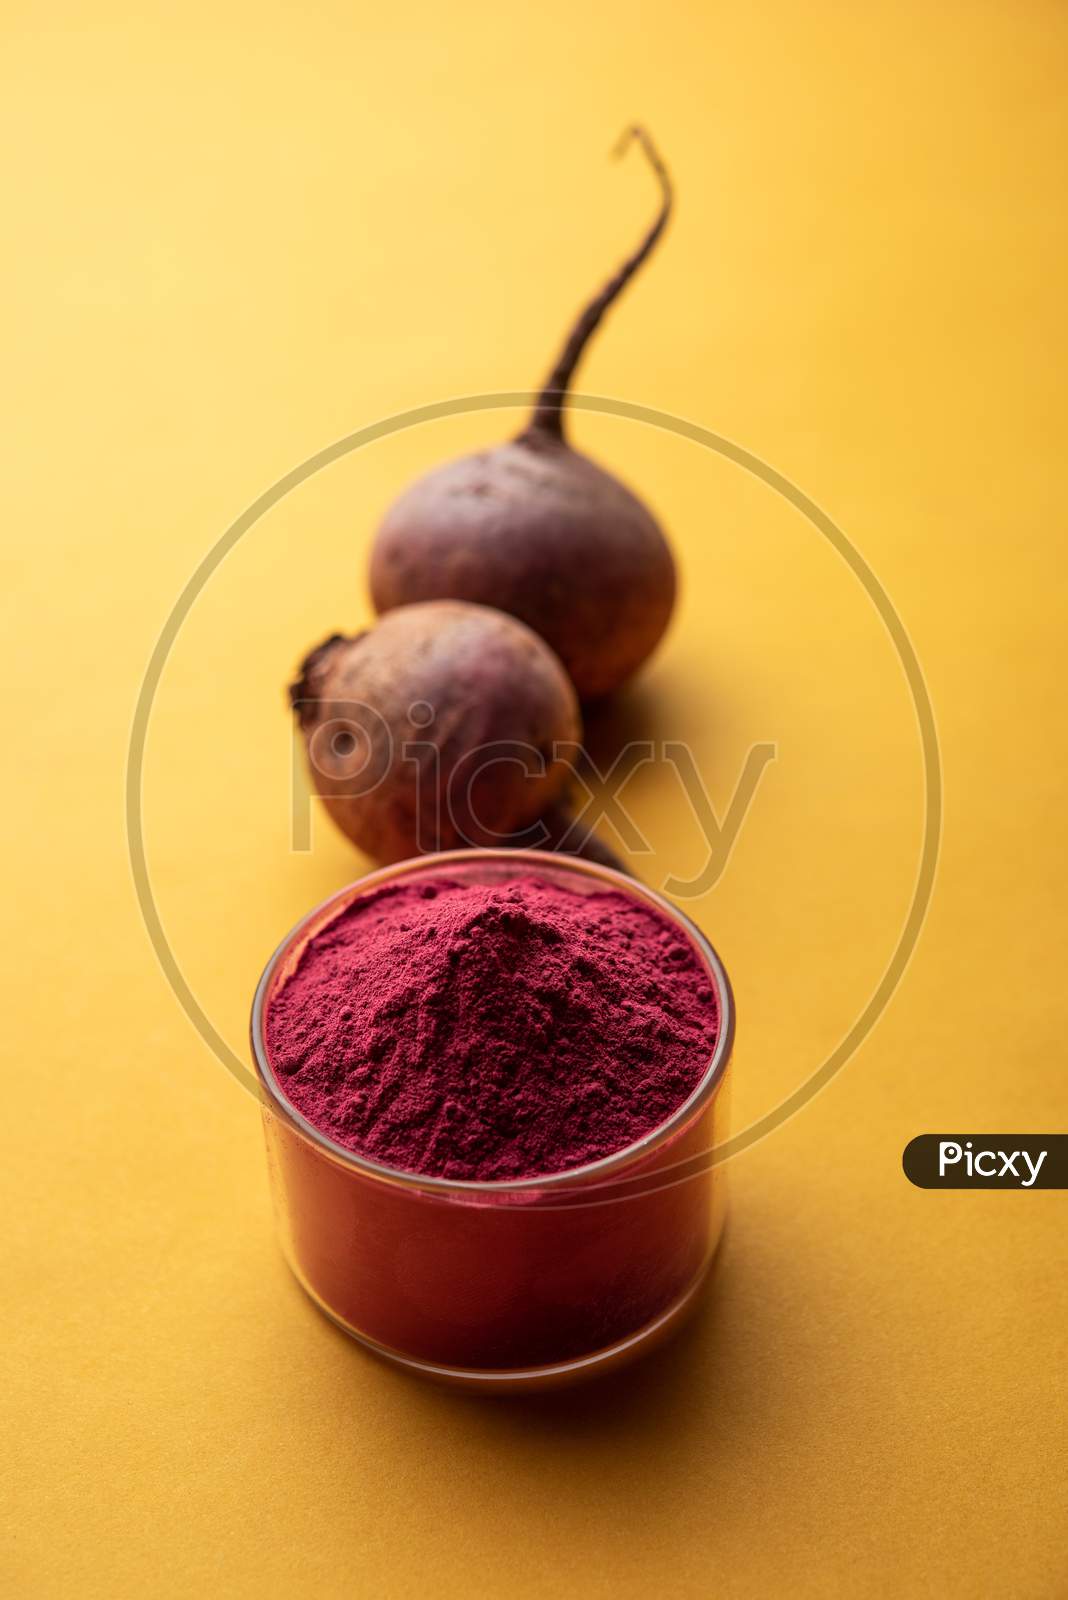 Heap Of Beetroot Or Beet Root Powder With Raw Whole Contains The Essential Minerals Iron, Potassium, And Magnesium